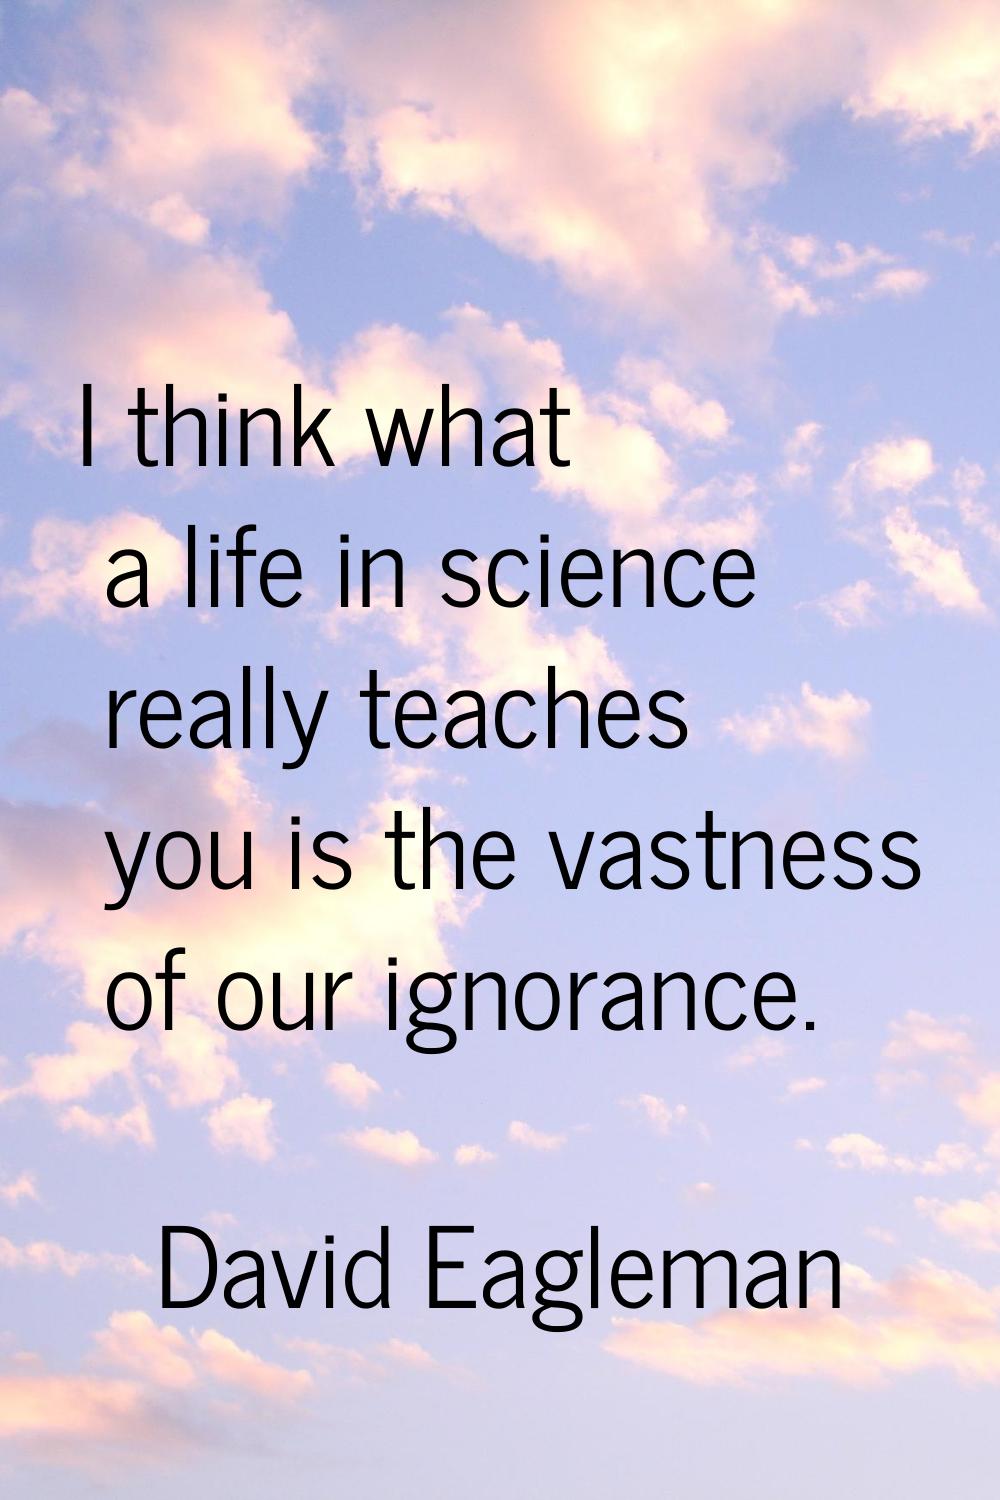 I think what a life in science really teaches you is the vastness of our ignorance.